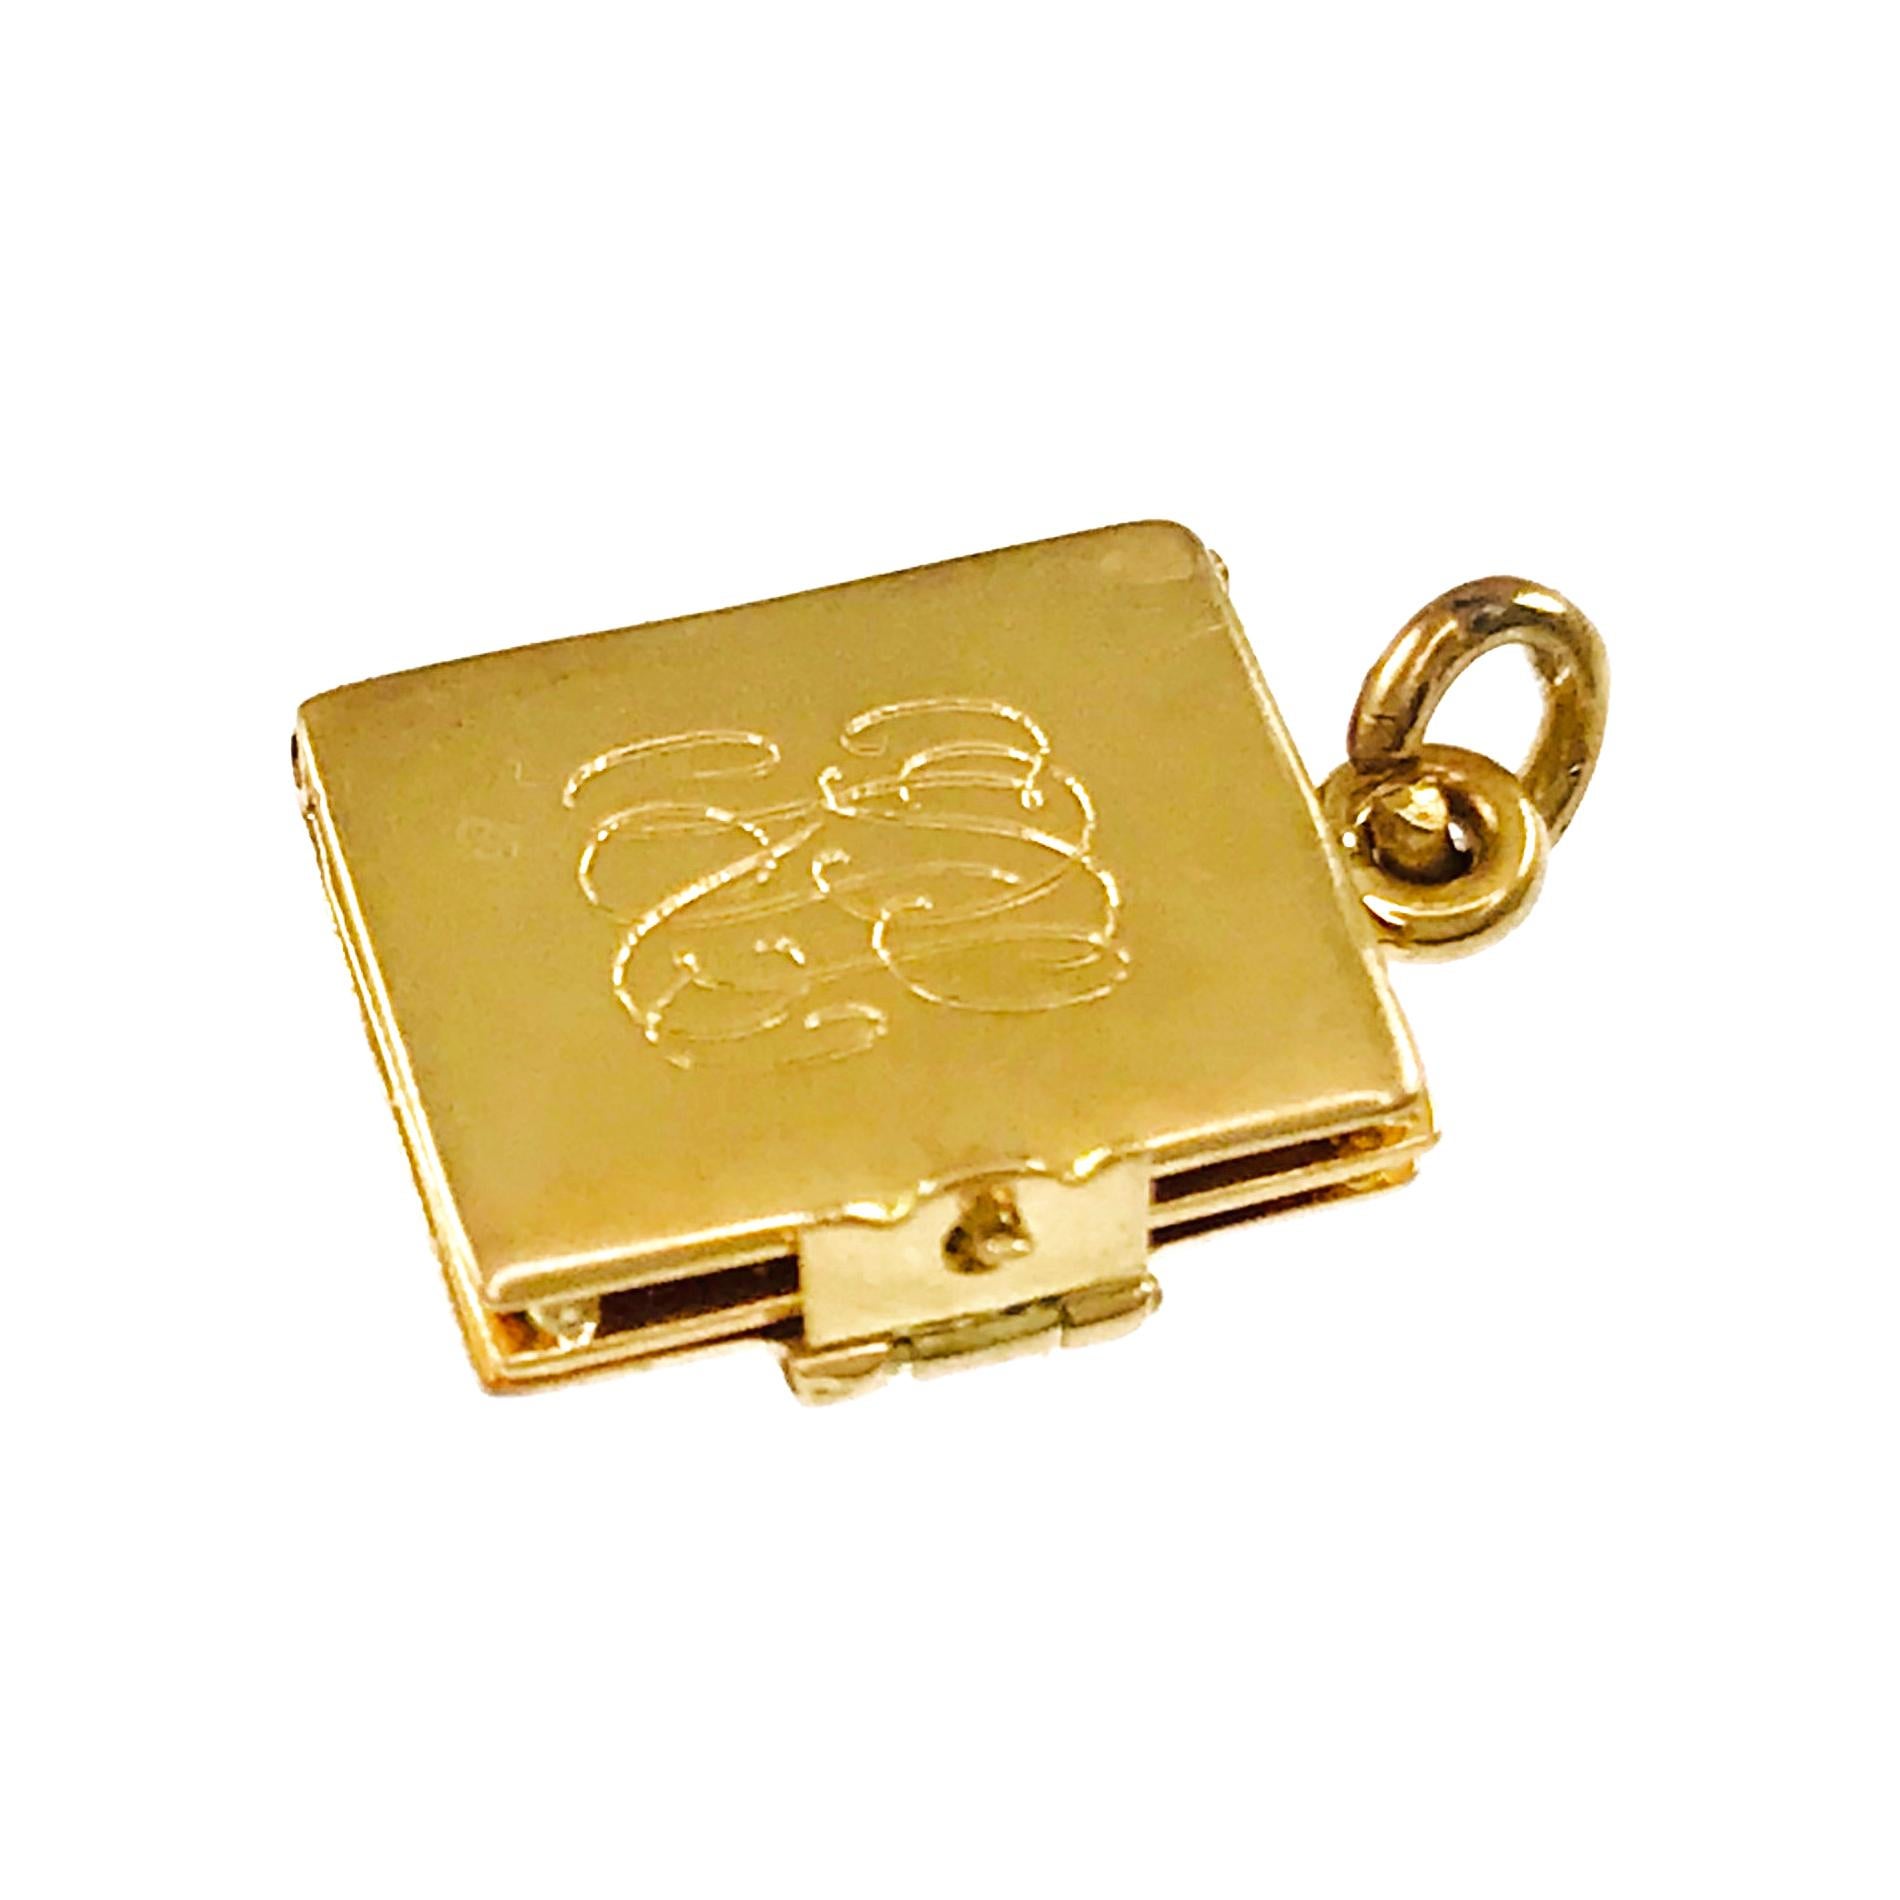 14 Karat Hinged Mini Booklet Pendant. The pendant has an overall smooth shiny finish and three pages/panels with a hinged closure. The front and back cover is monogrammed with script letters. On the inside cover in all capitals are the words FROM